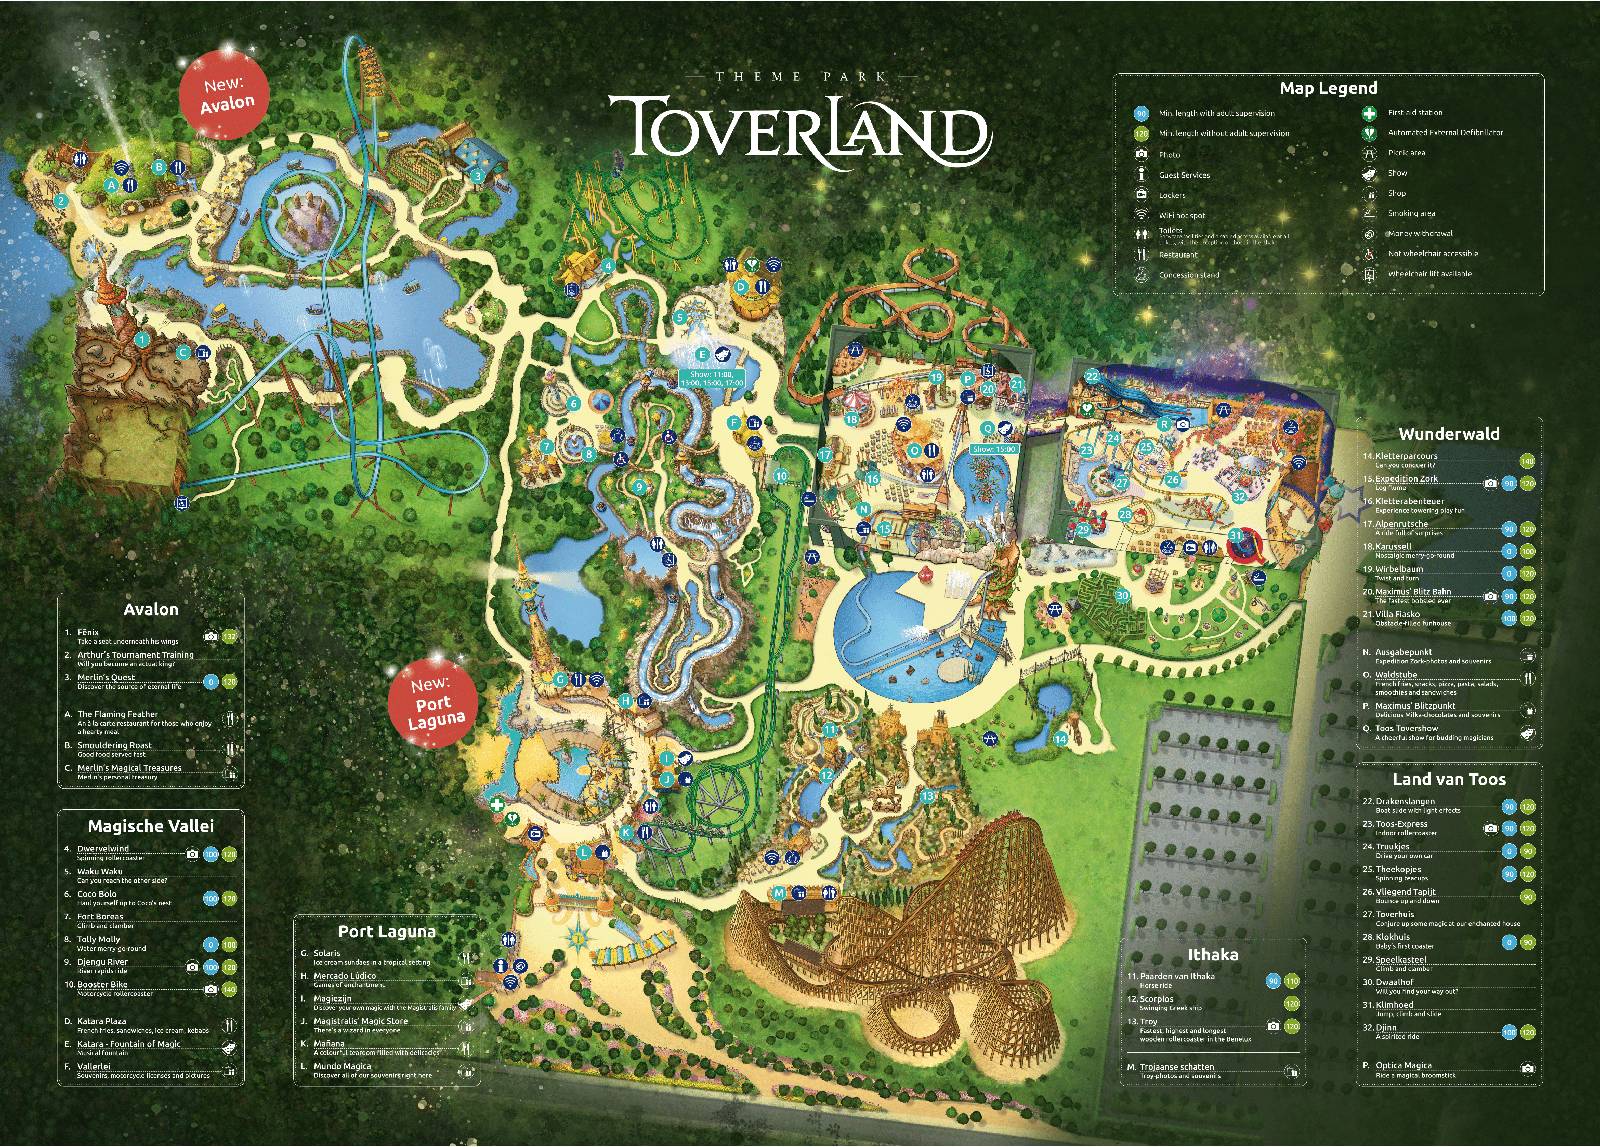 Map of Toverland